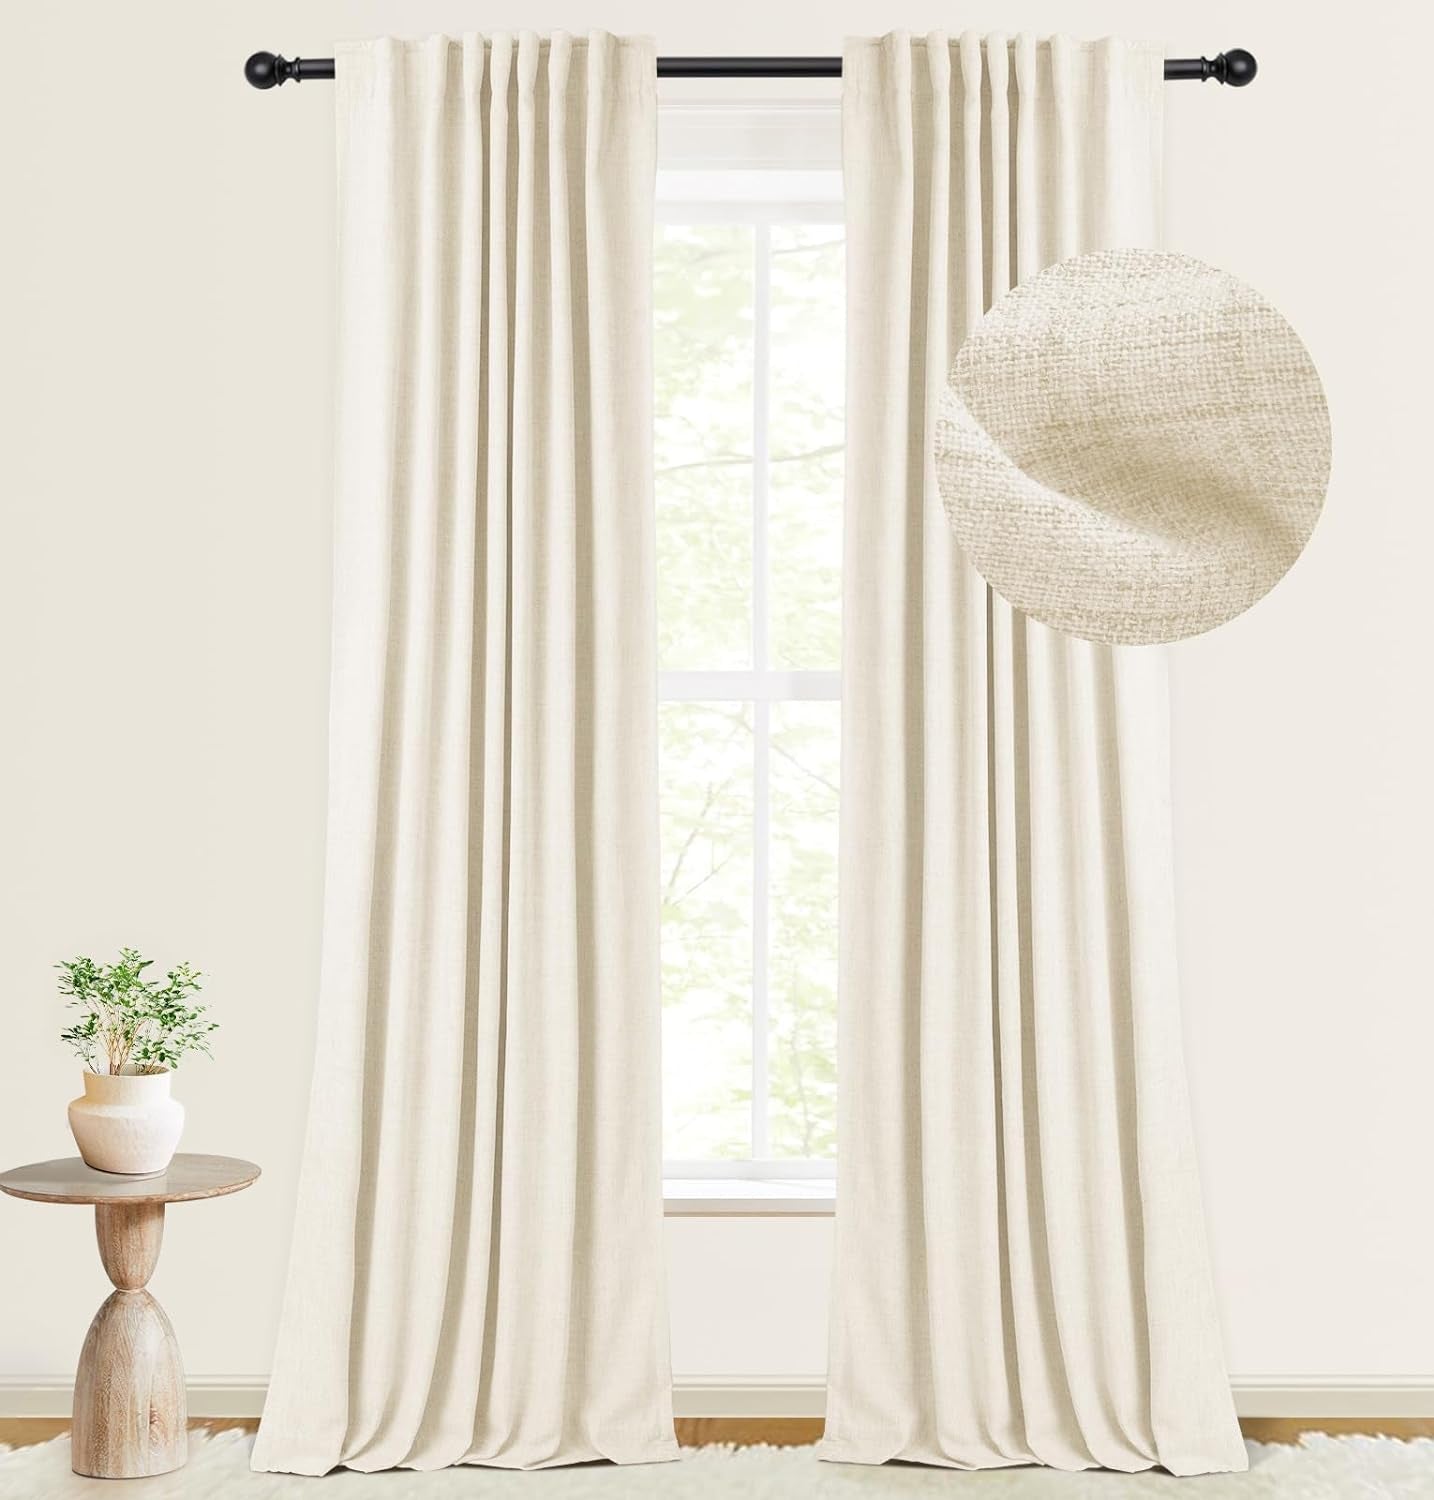 INOVADAY 100% Blackout Curtains for Bedroom 84 Inch Length 2 Panels Set, Linen Blackout Curtains 84 Inches Long, Back Tab/Rod Pocket Black Out Curtains for Living Room Windows - Beige, W50 X L84  INOVADAY 05 Light Cream 50''W X 96''L 